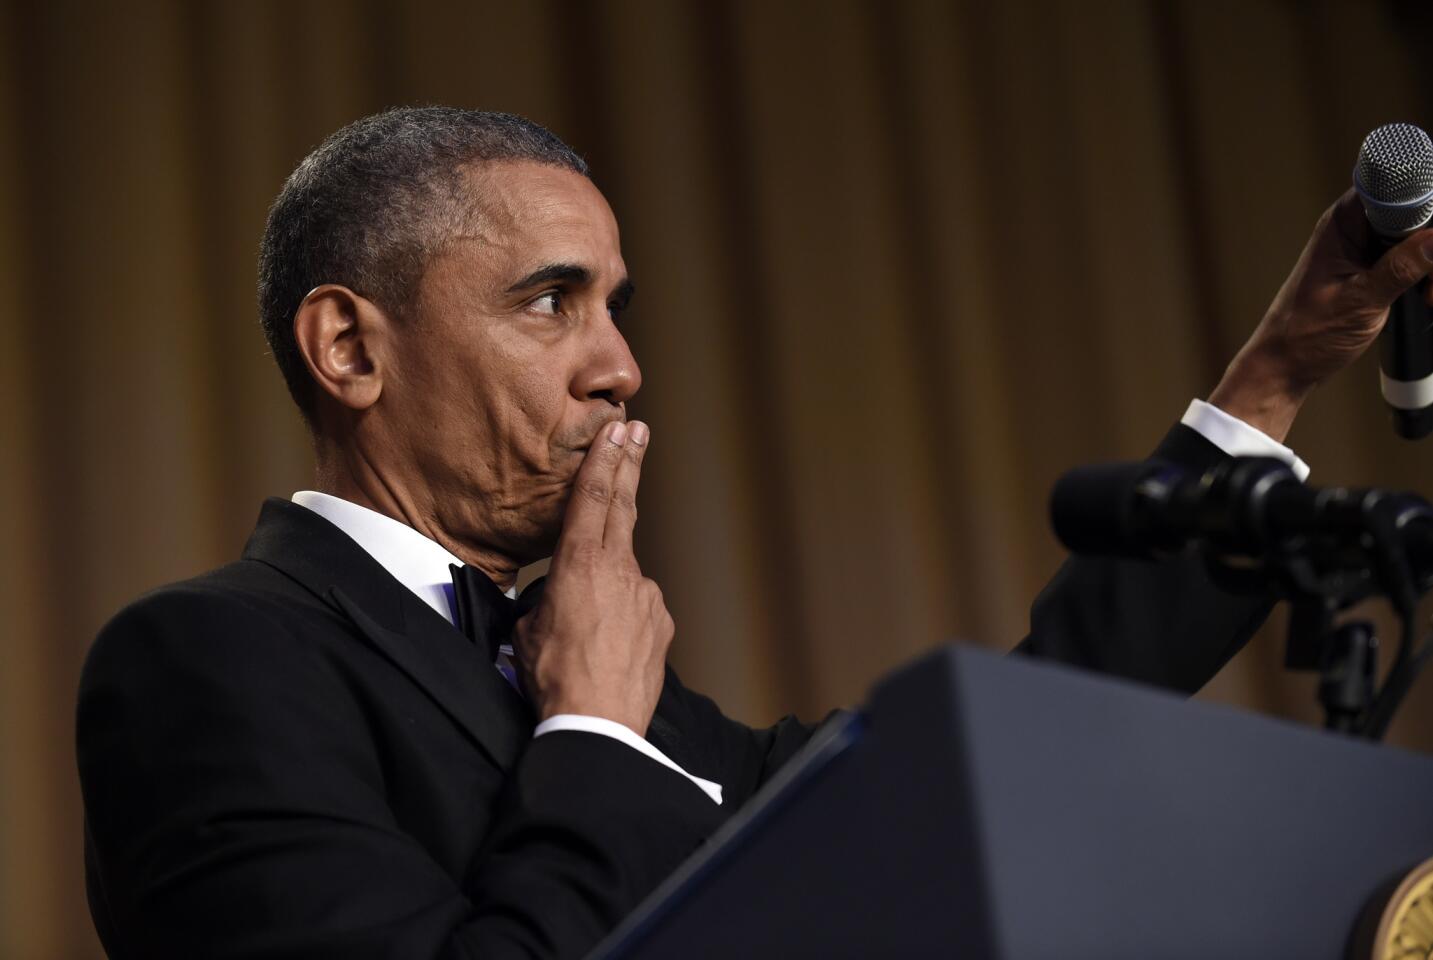 President Barack Obama concludes his remarks after speaking at the annual White House Correspondents' Association dinner at the Washington Hilton in Washington, Saturday, April 30, 2016.